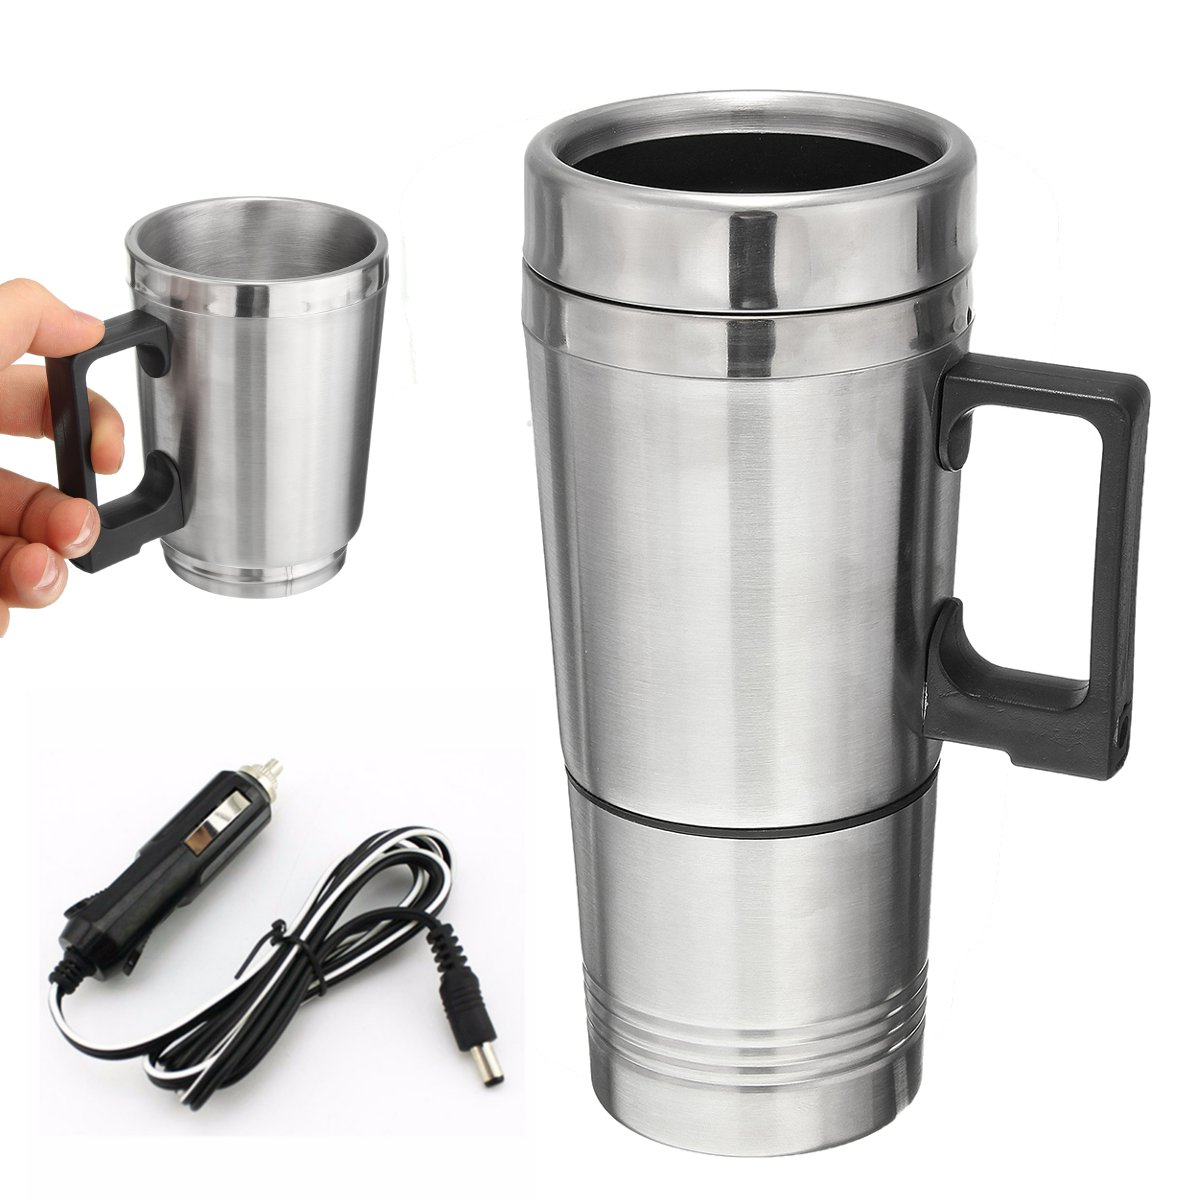 Car Electric Water Heater Heating Mug Stainless Steel Coffee Kettle Cup Hot Sale